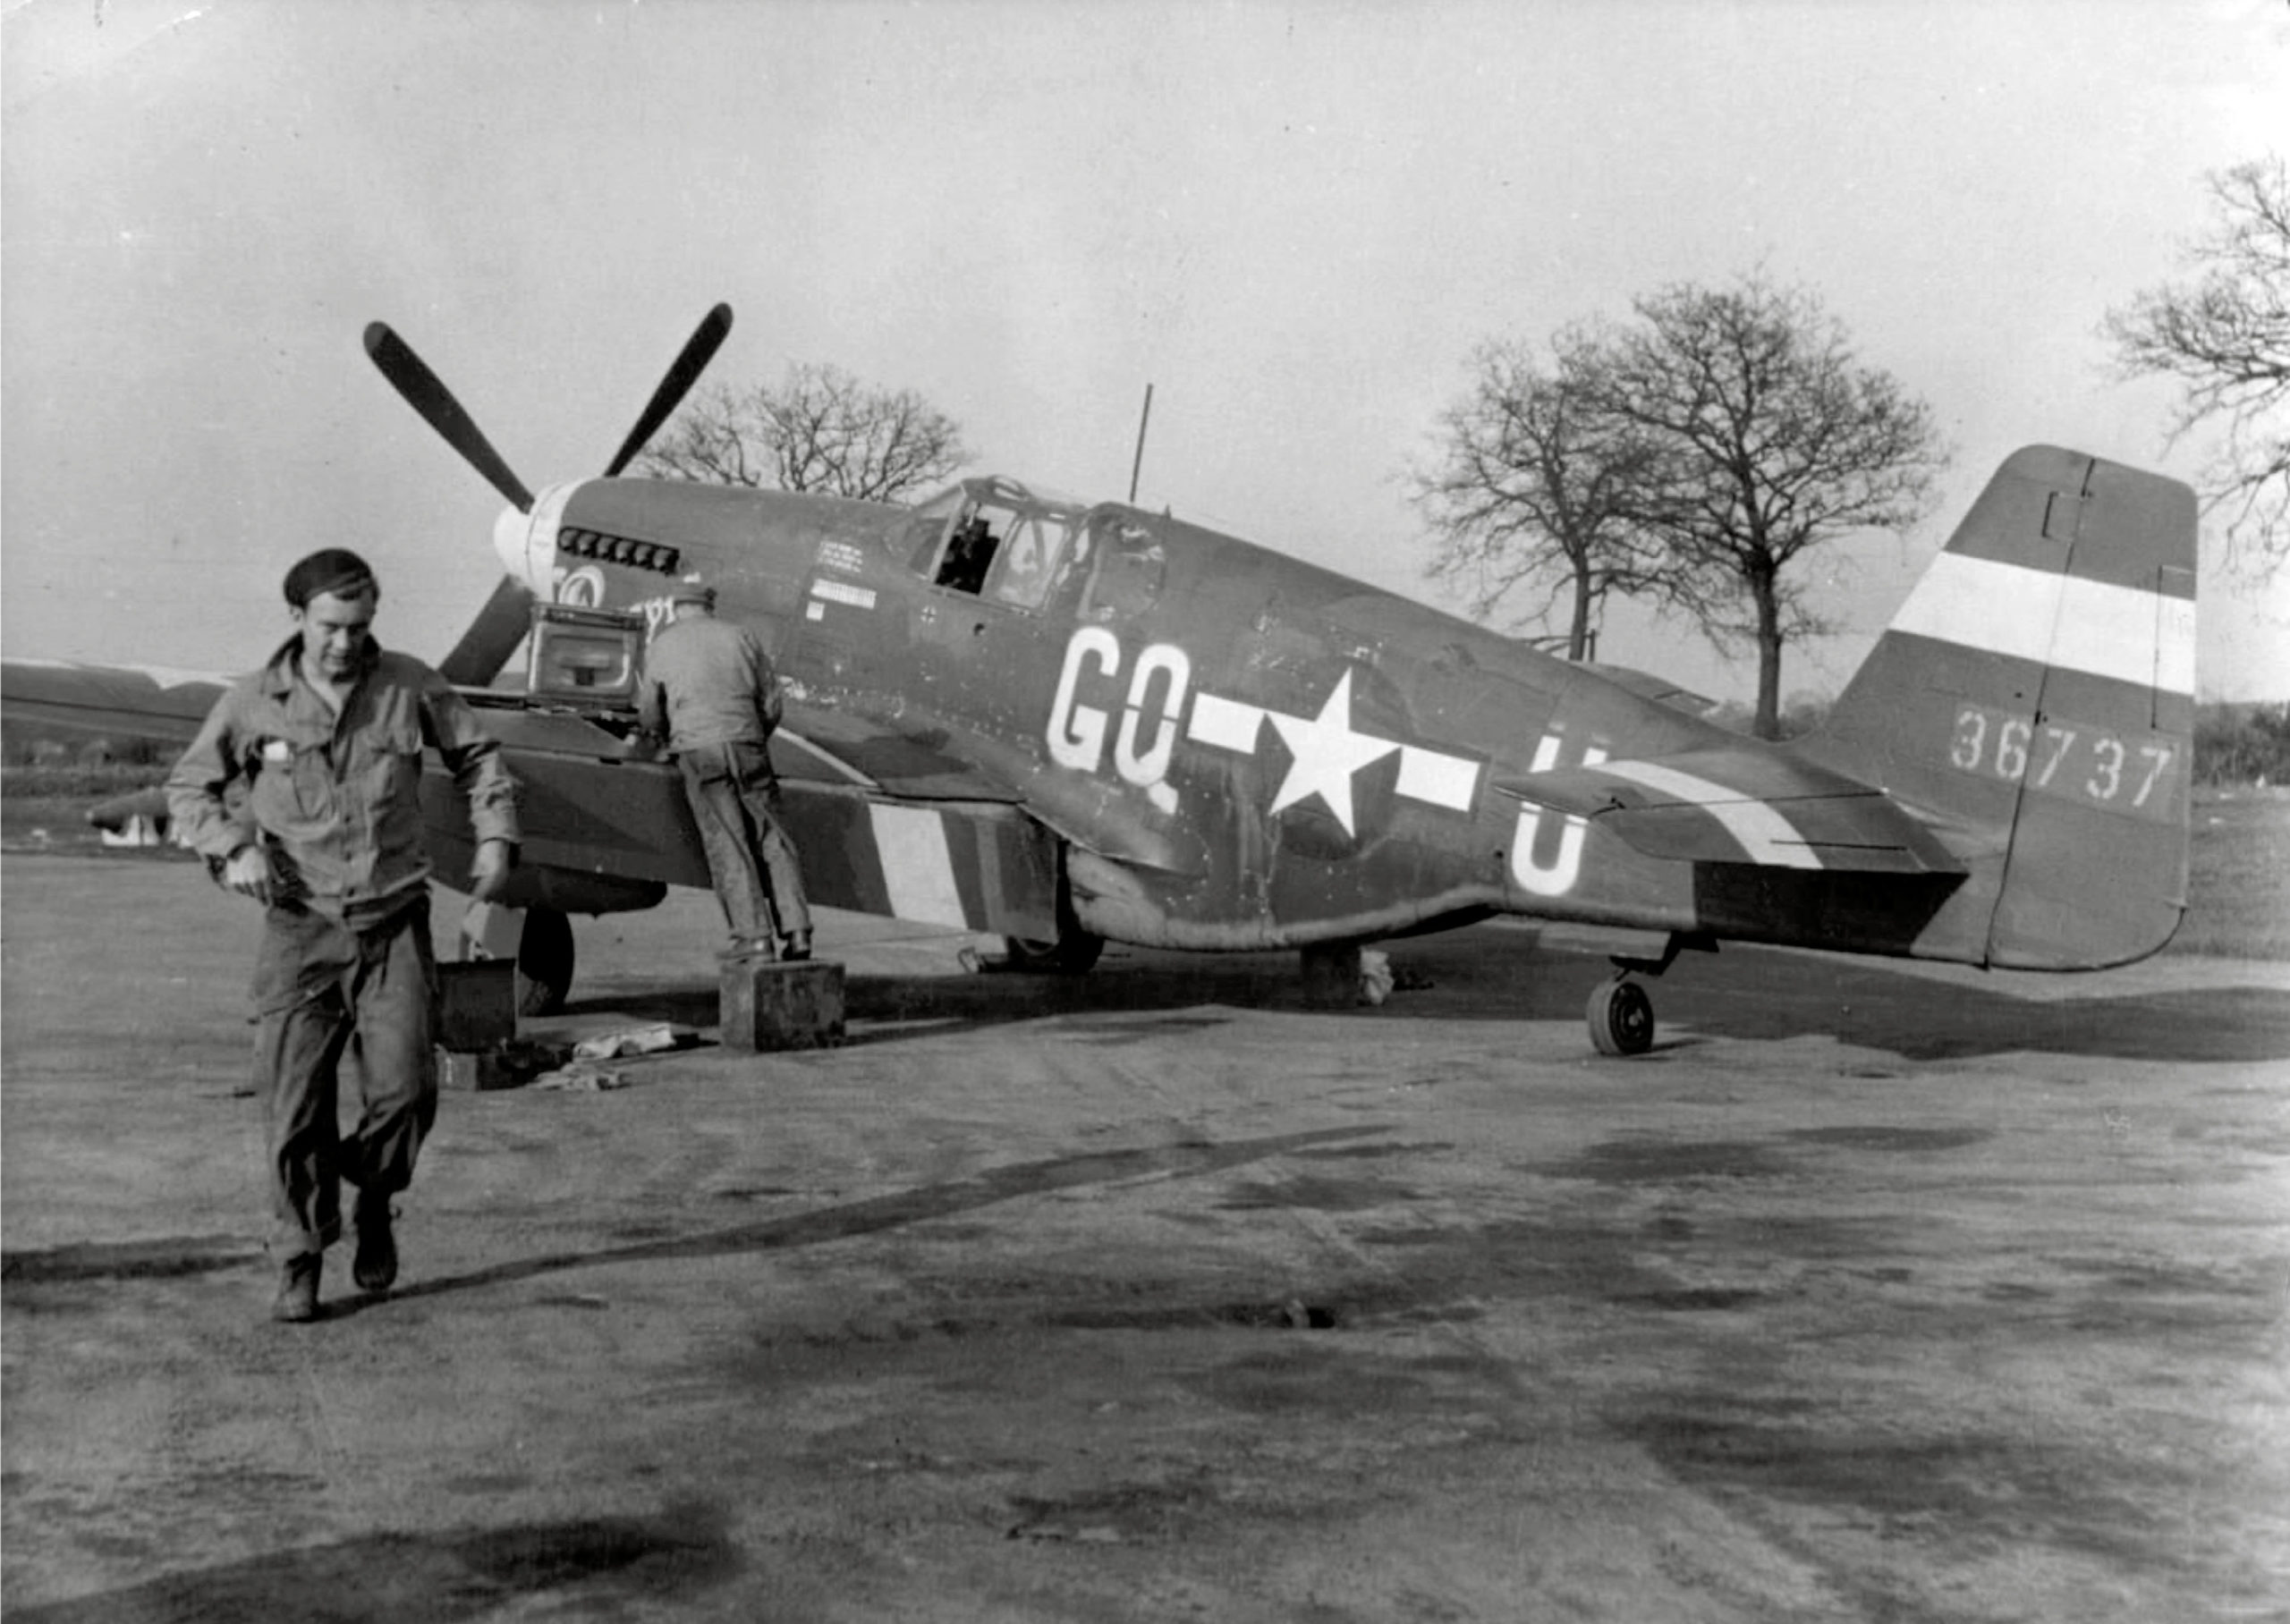 World War Two Mustang plane's pilot 'reduced safety' mid-air